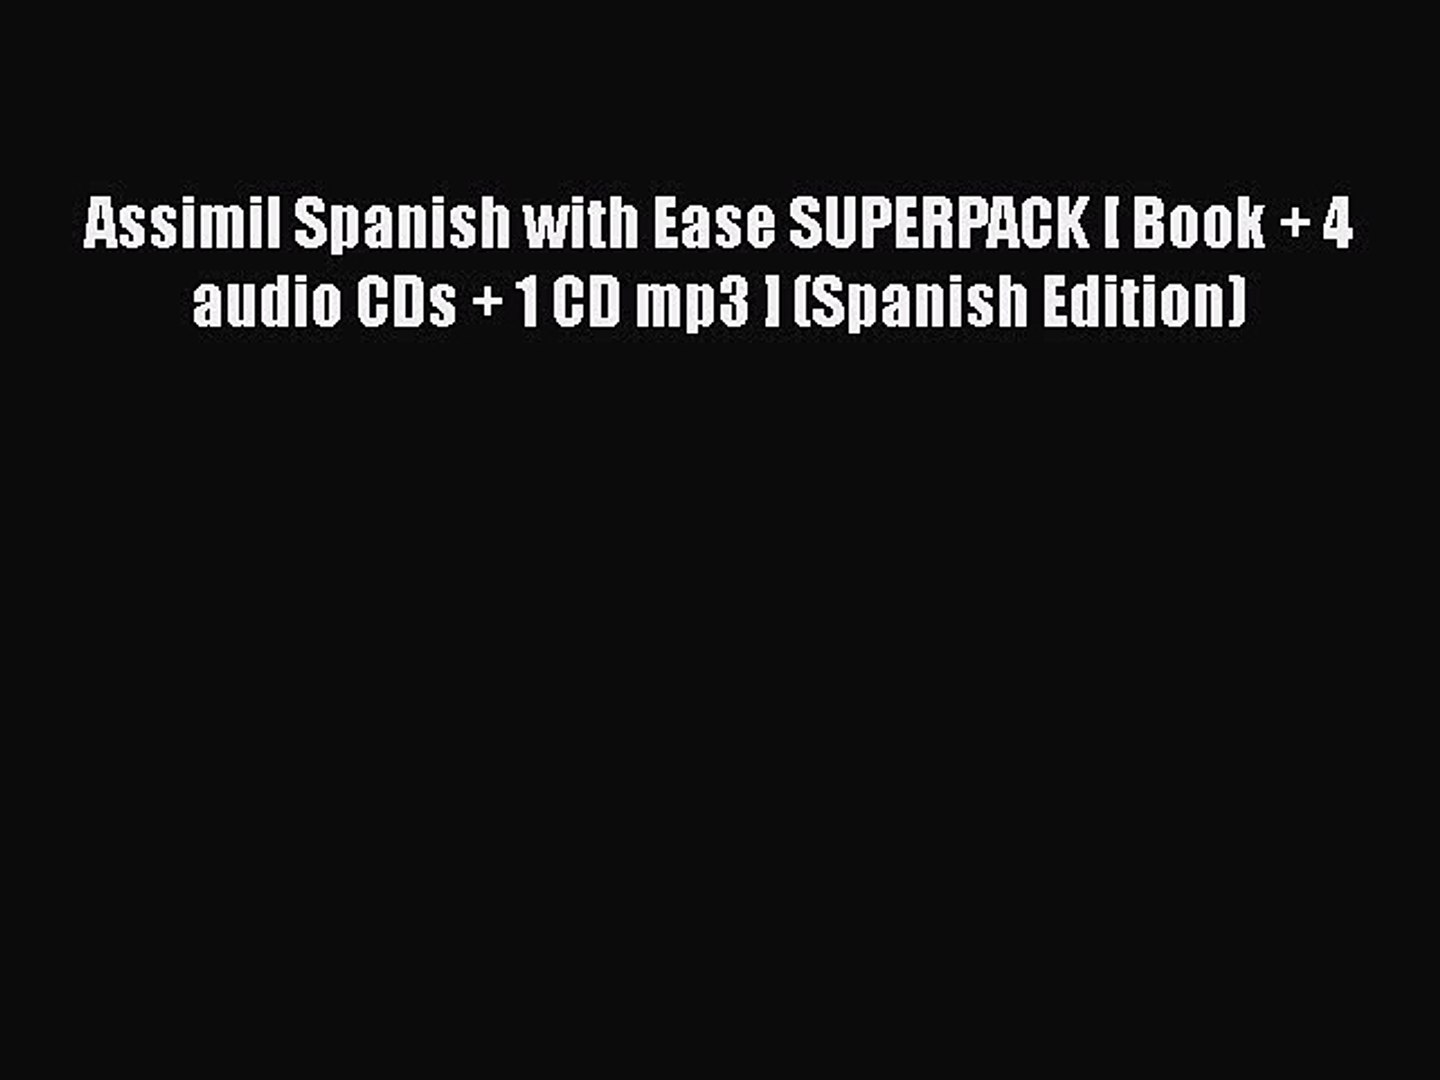 Download Assimil Spanish with Ease SUPERPACK [ Book + 4 audio CDs + 1 CD mp3  ] (Spanish Edition) - video Dailymotion